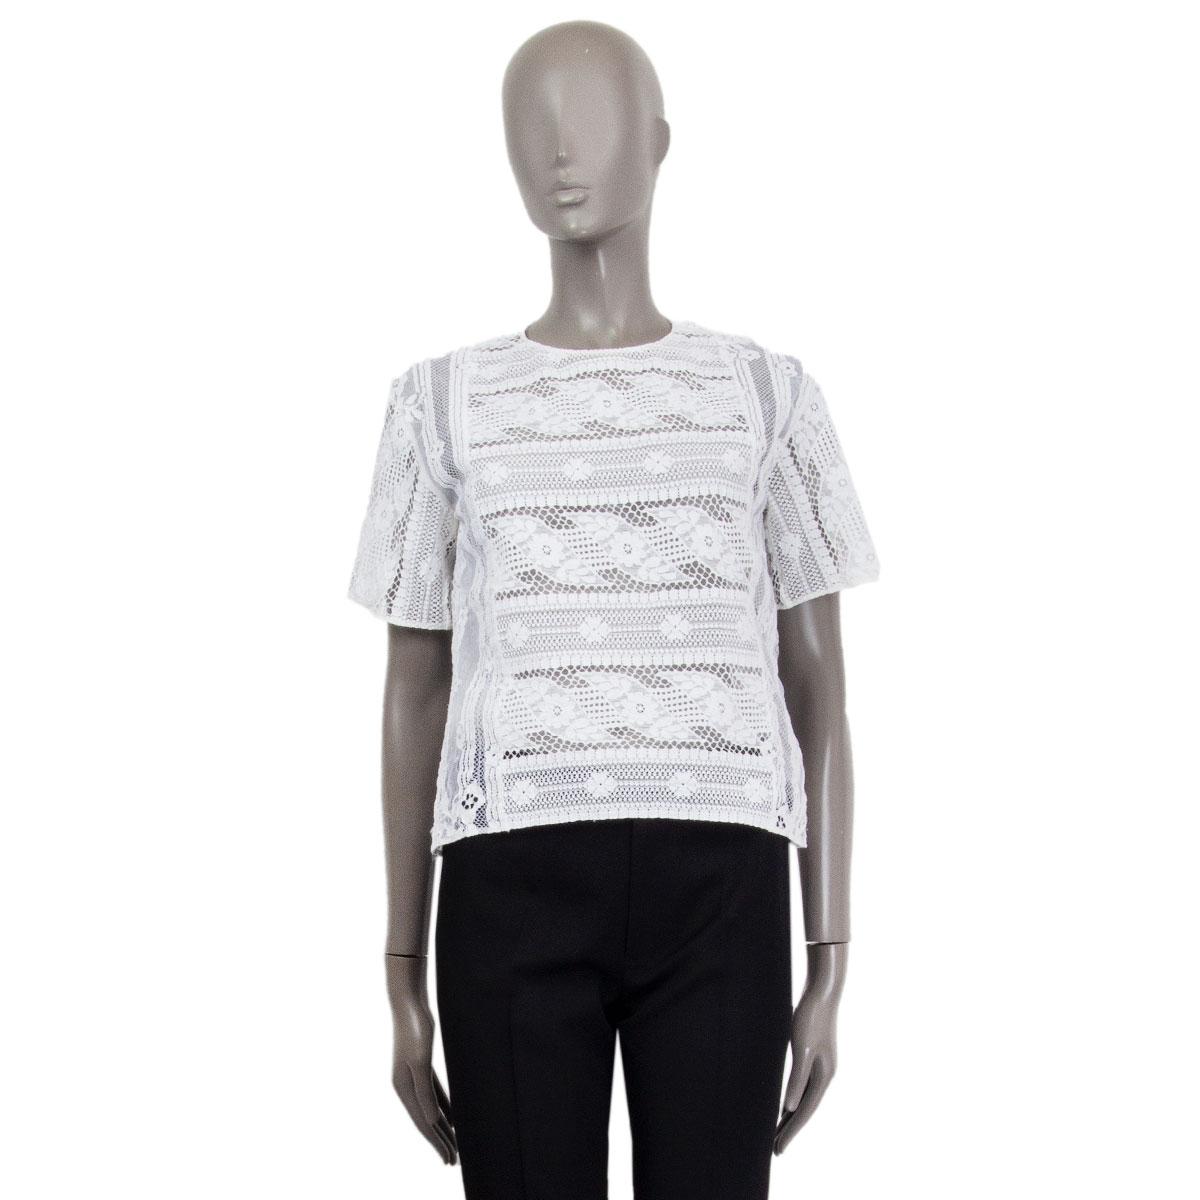 Valentino sheer short-sleeve round-neck lace top in white viscose (38%), cotton (34%) and polyamide (28%). Lined in white tulle. Keyhole and button closure. Has been worn and is in excellent condition. 

Tag Size 40
Size S
Shoulder Width 42cm